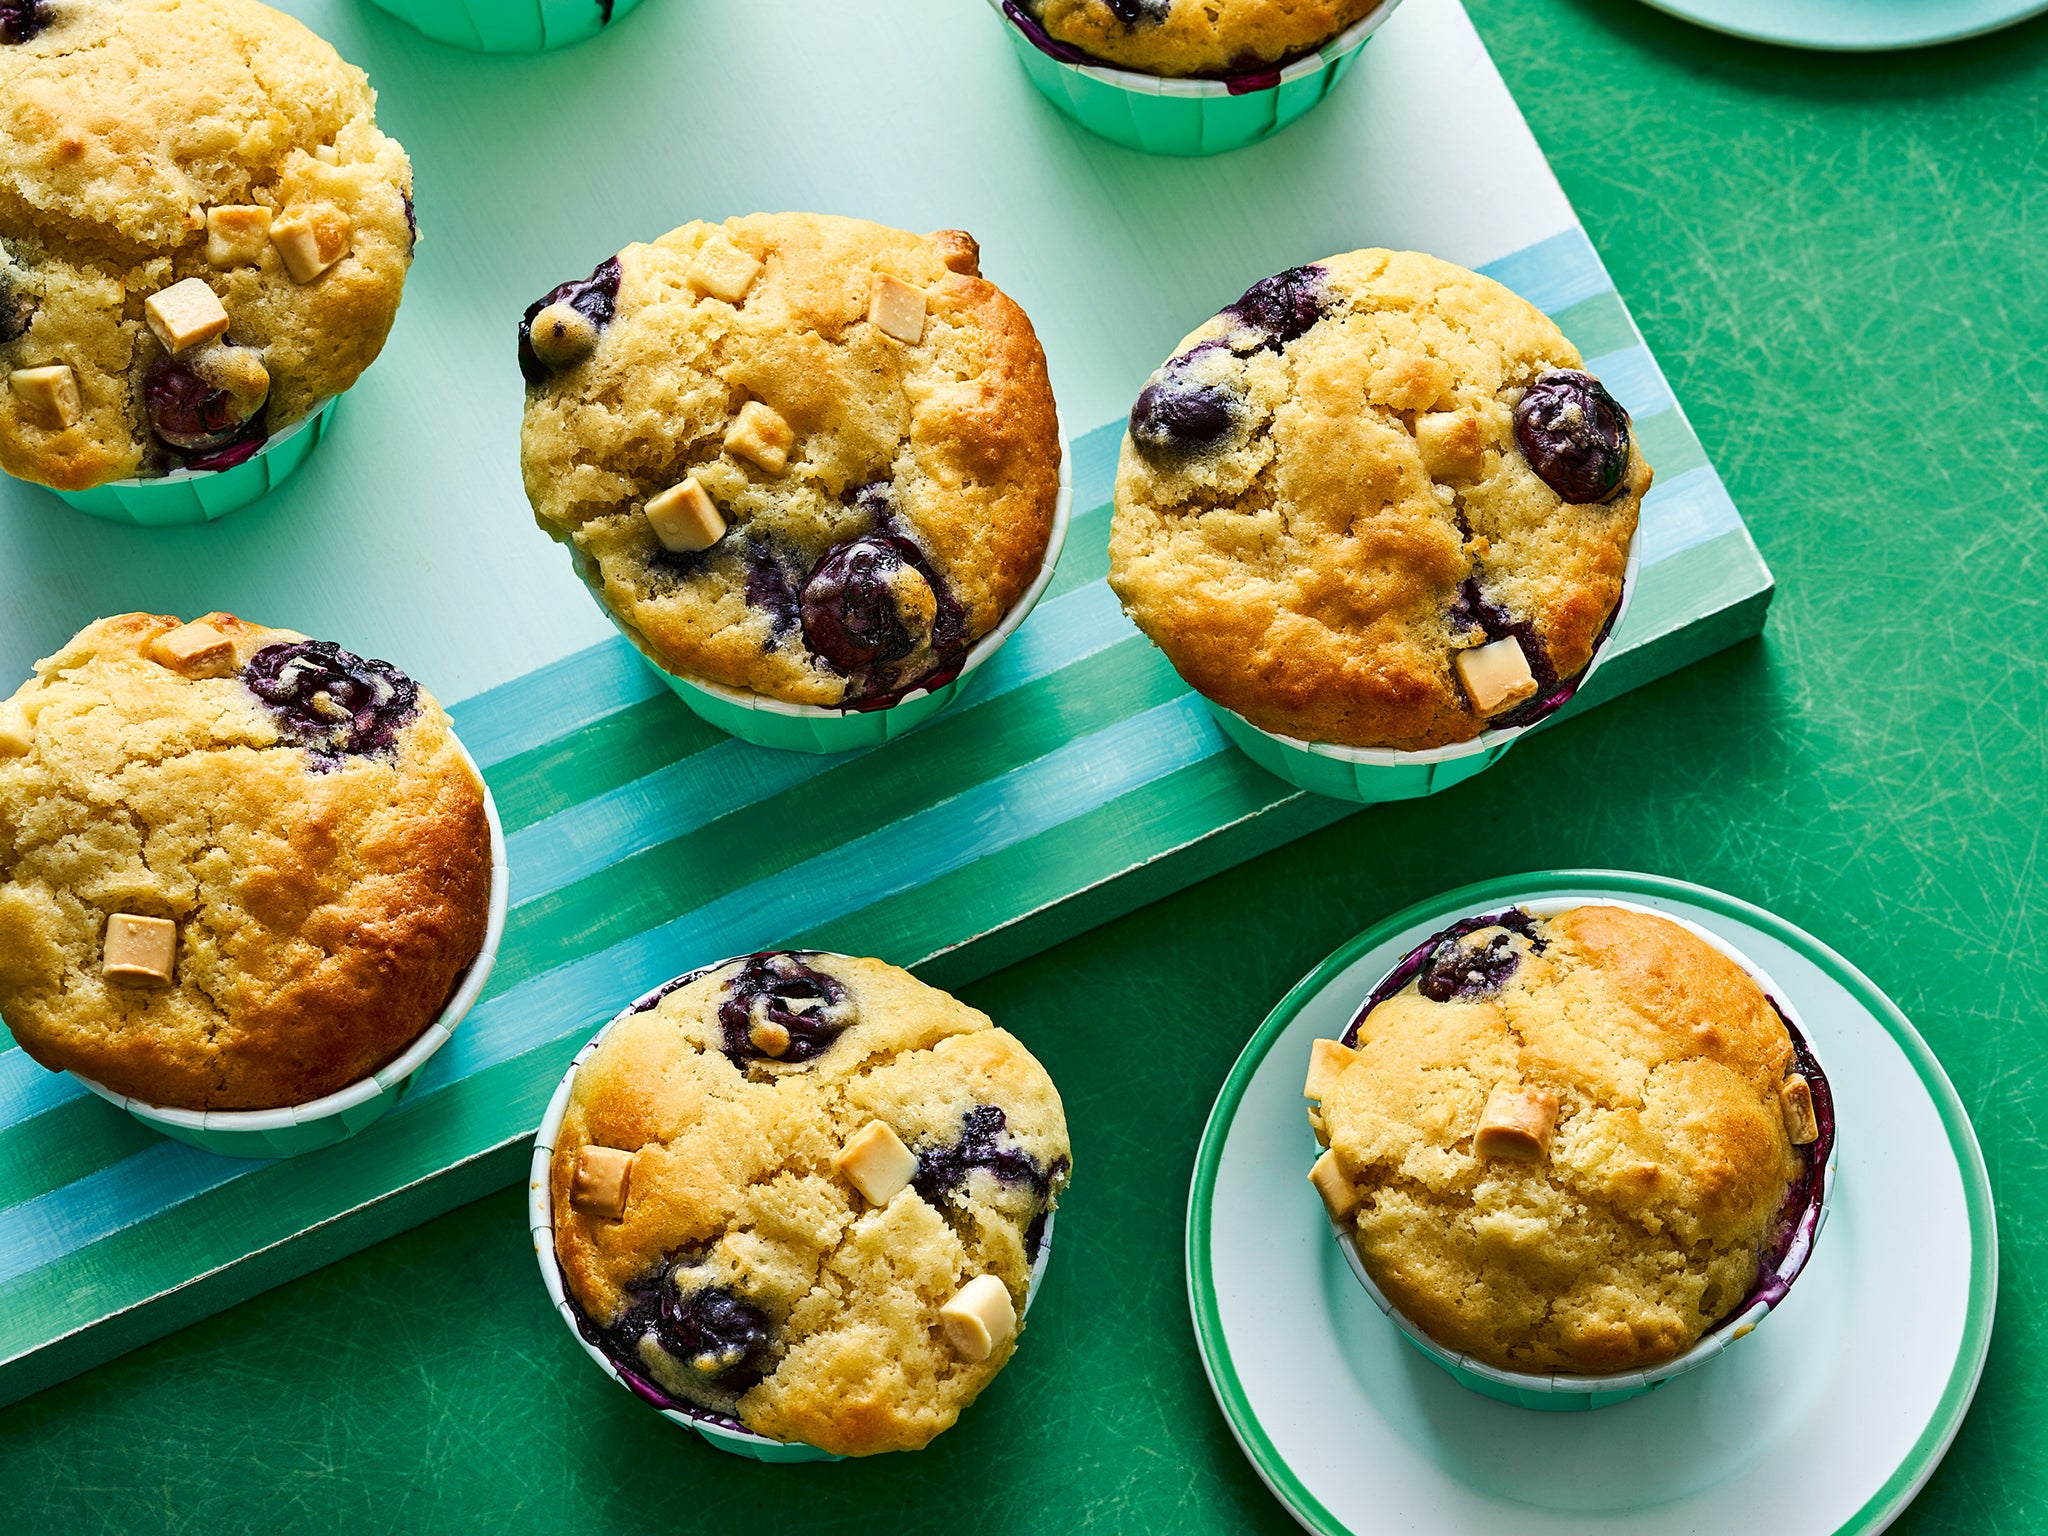 These fluffy muffins will have you coming back for seconds... or thirds